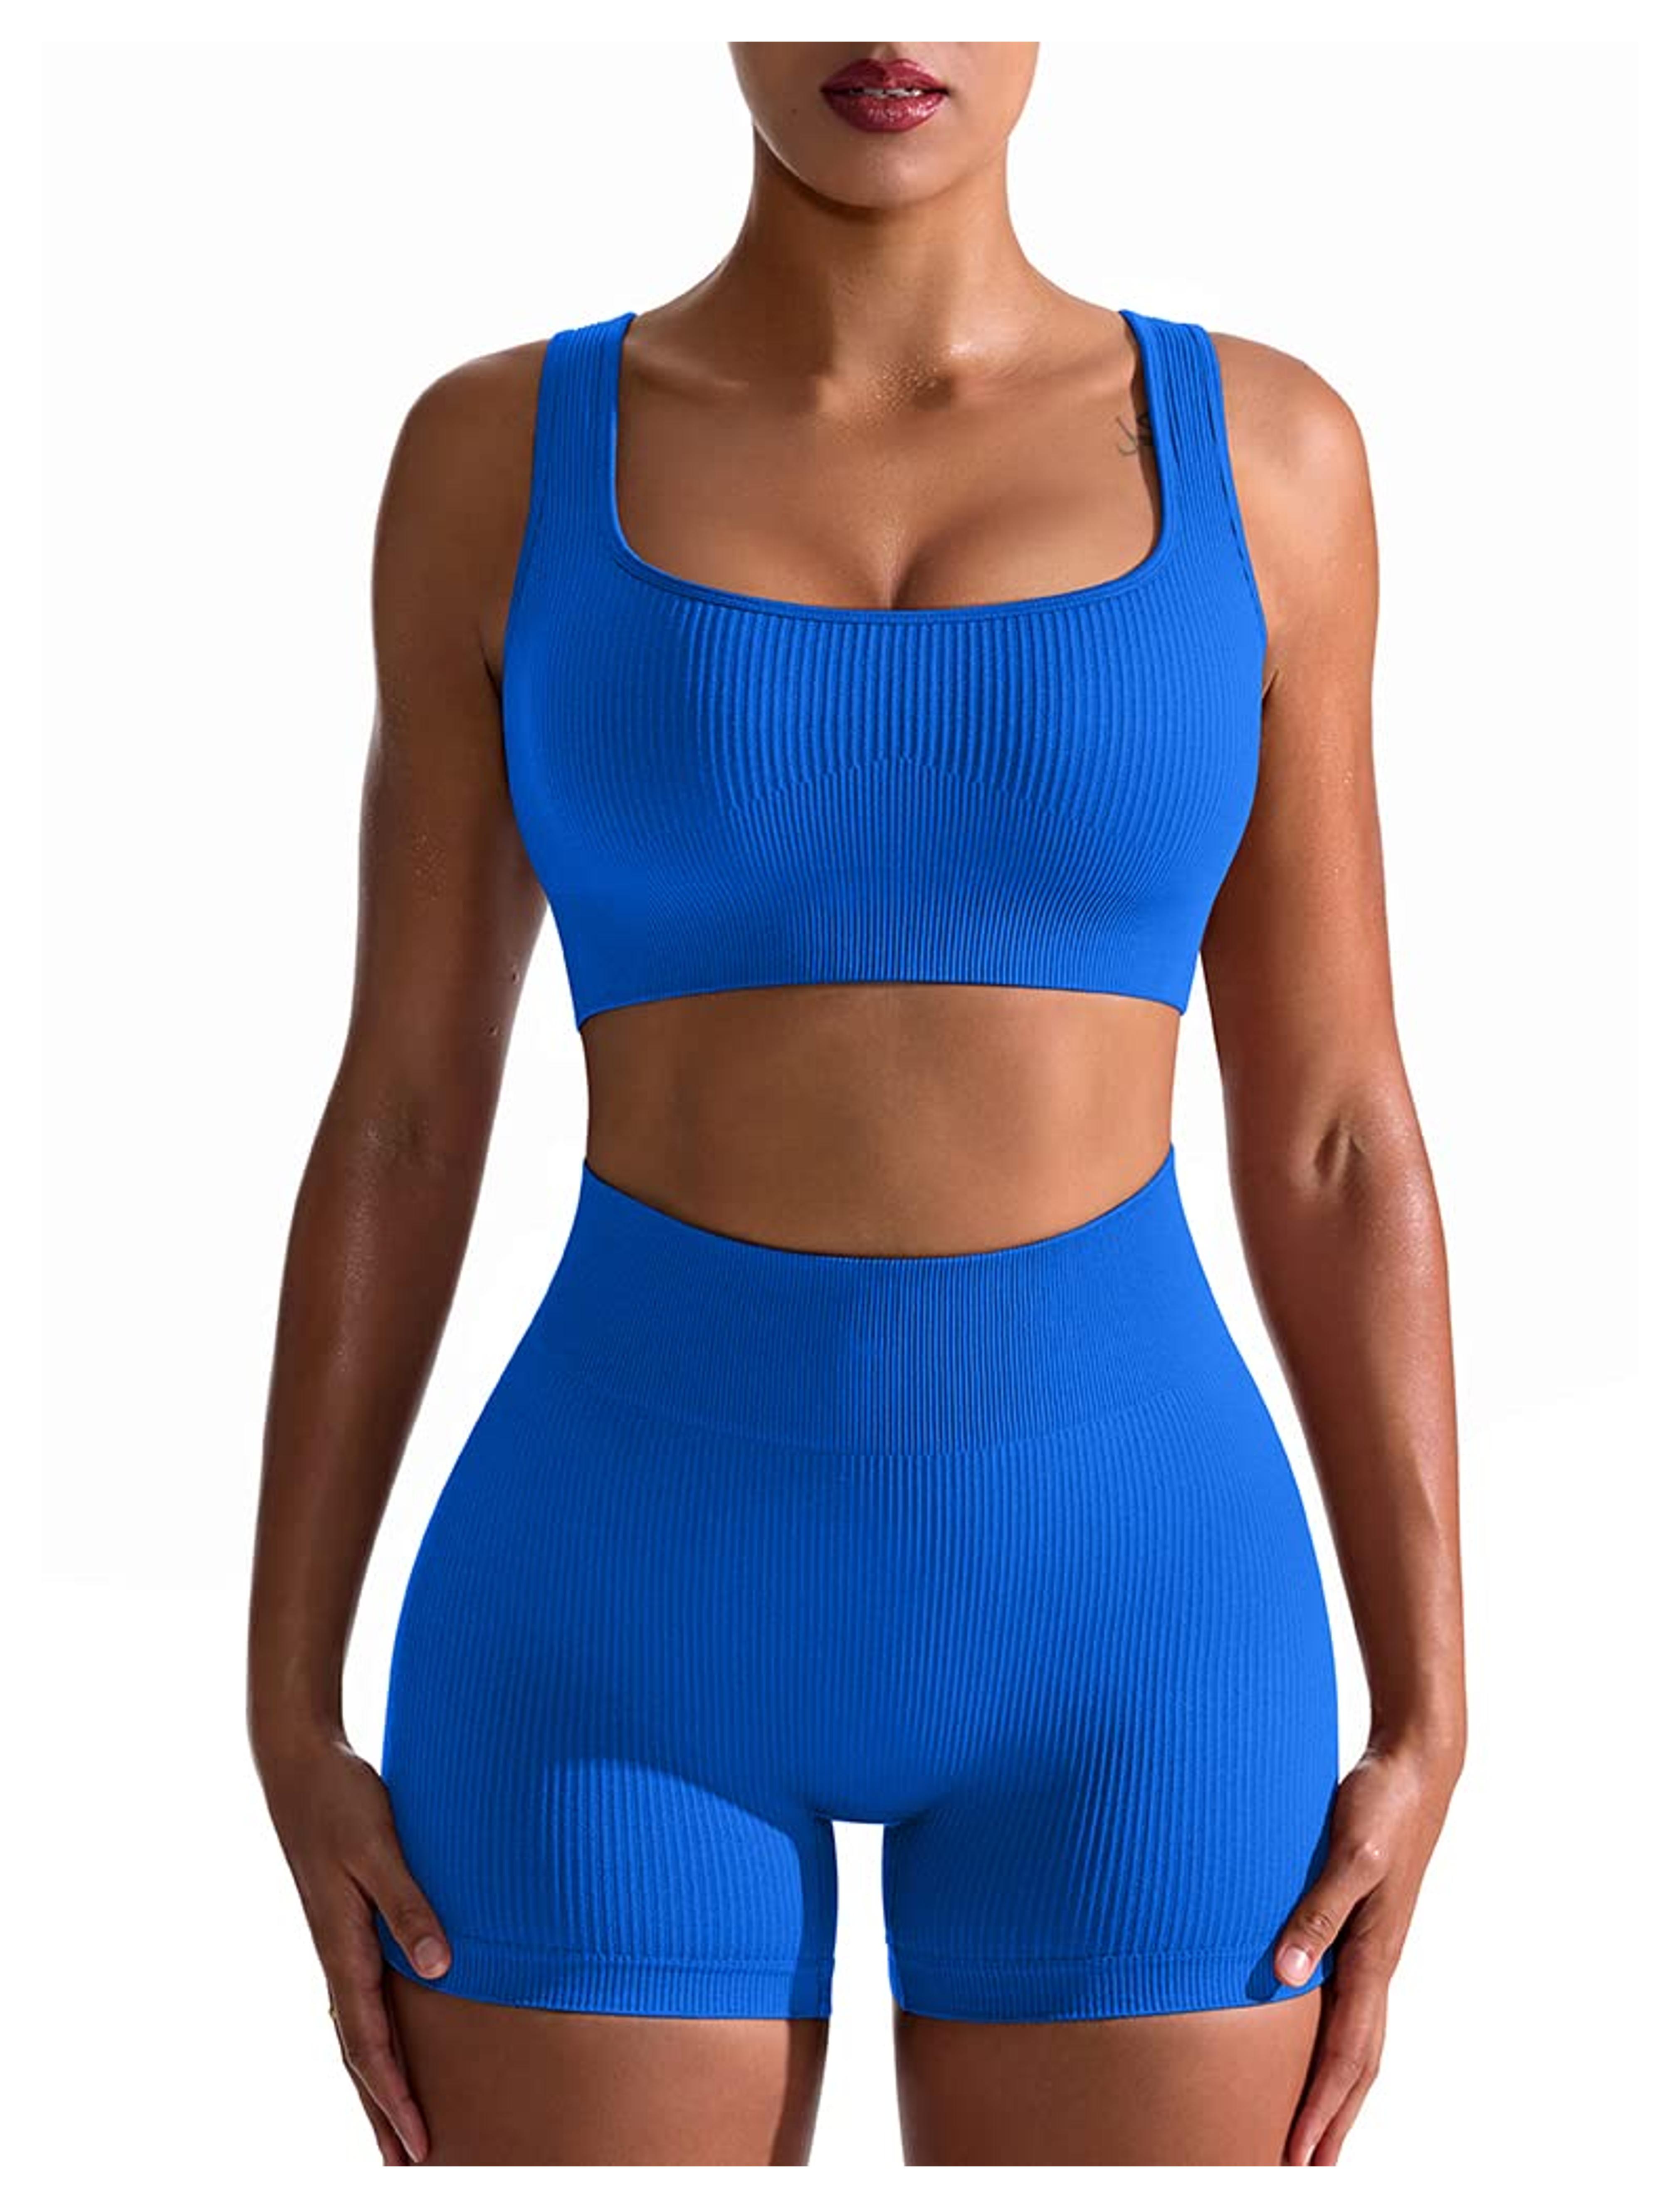 OQQ Workout Outfits for Women 2 Piece Seamless Ribbed High Waist Leggings with Sports Bra Exercise Set Blue2